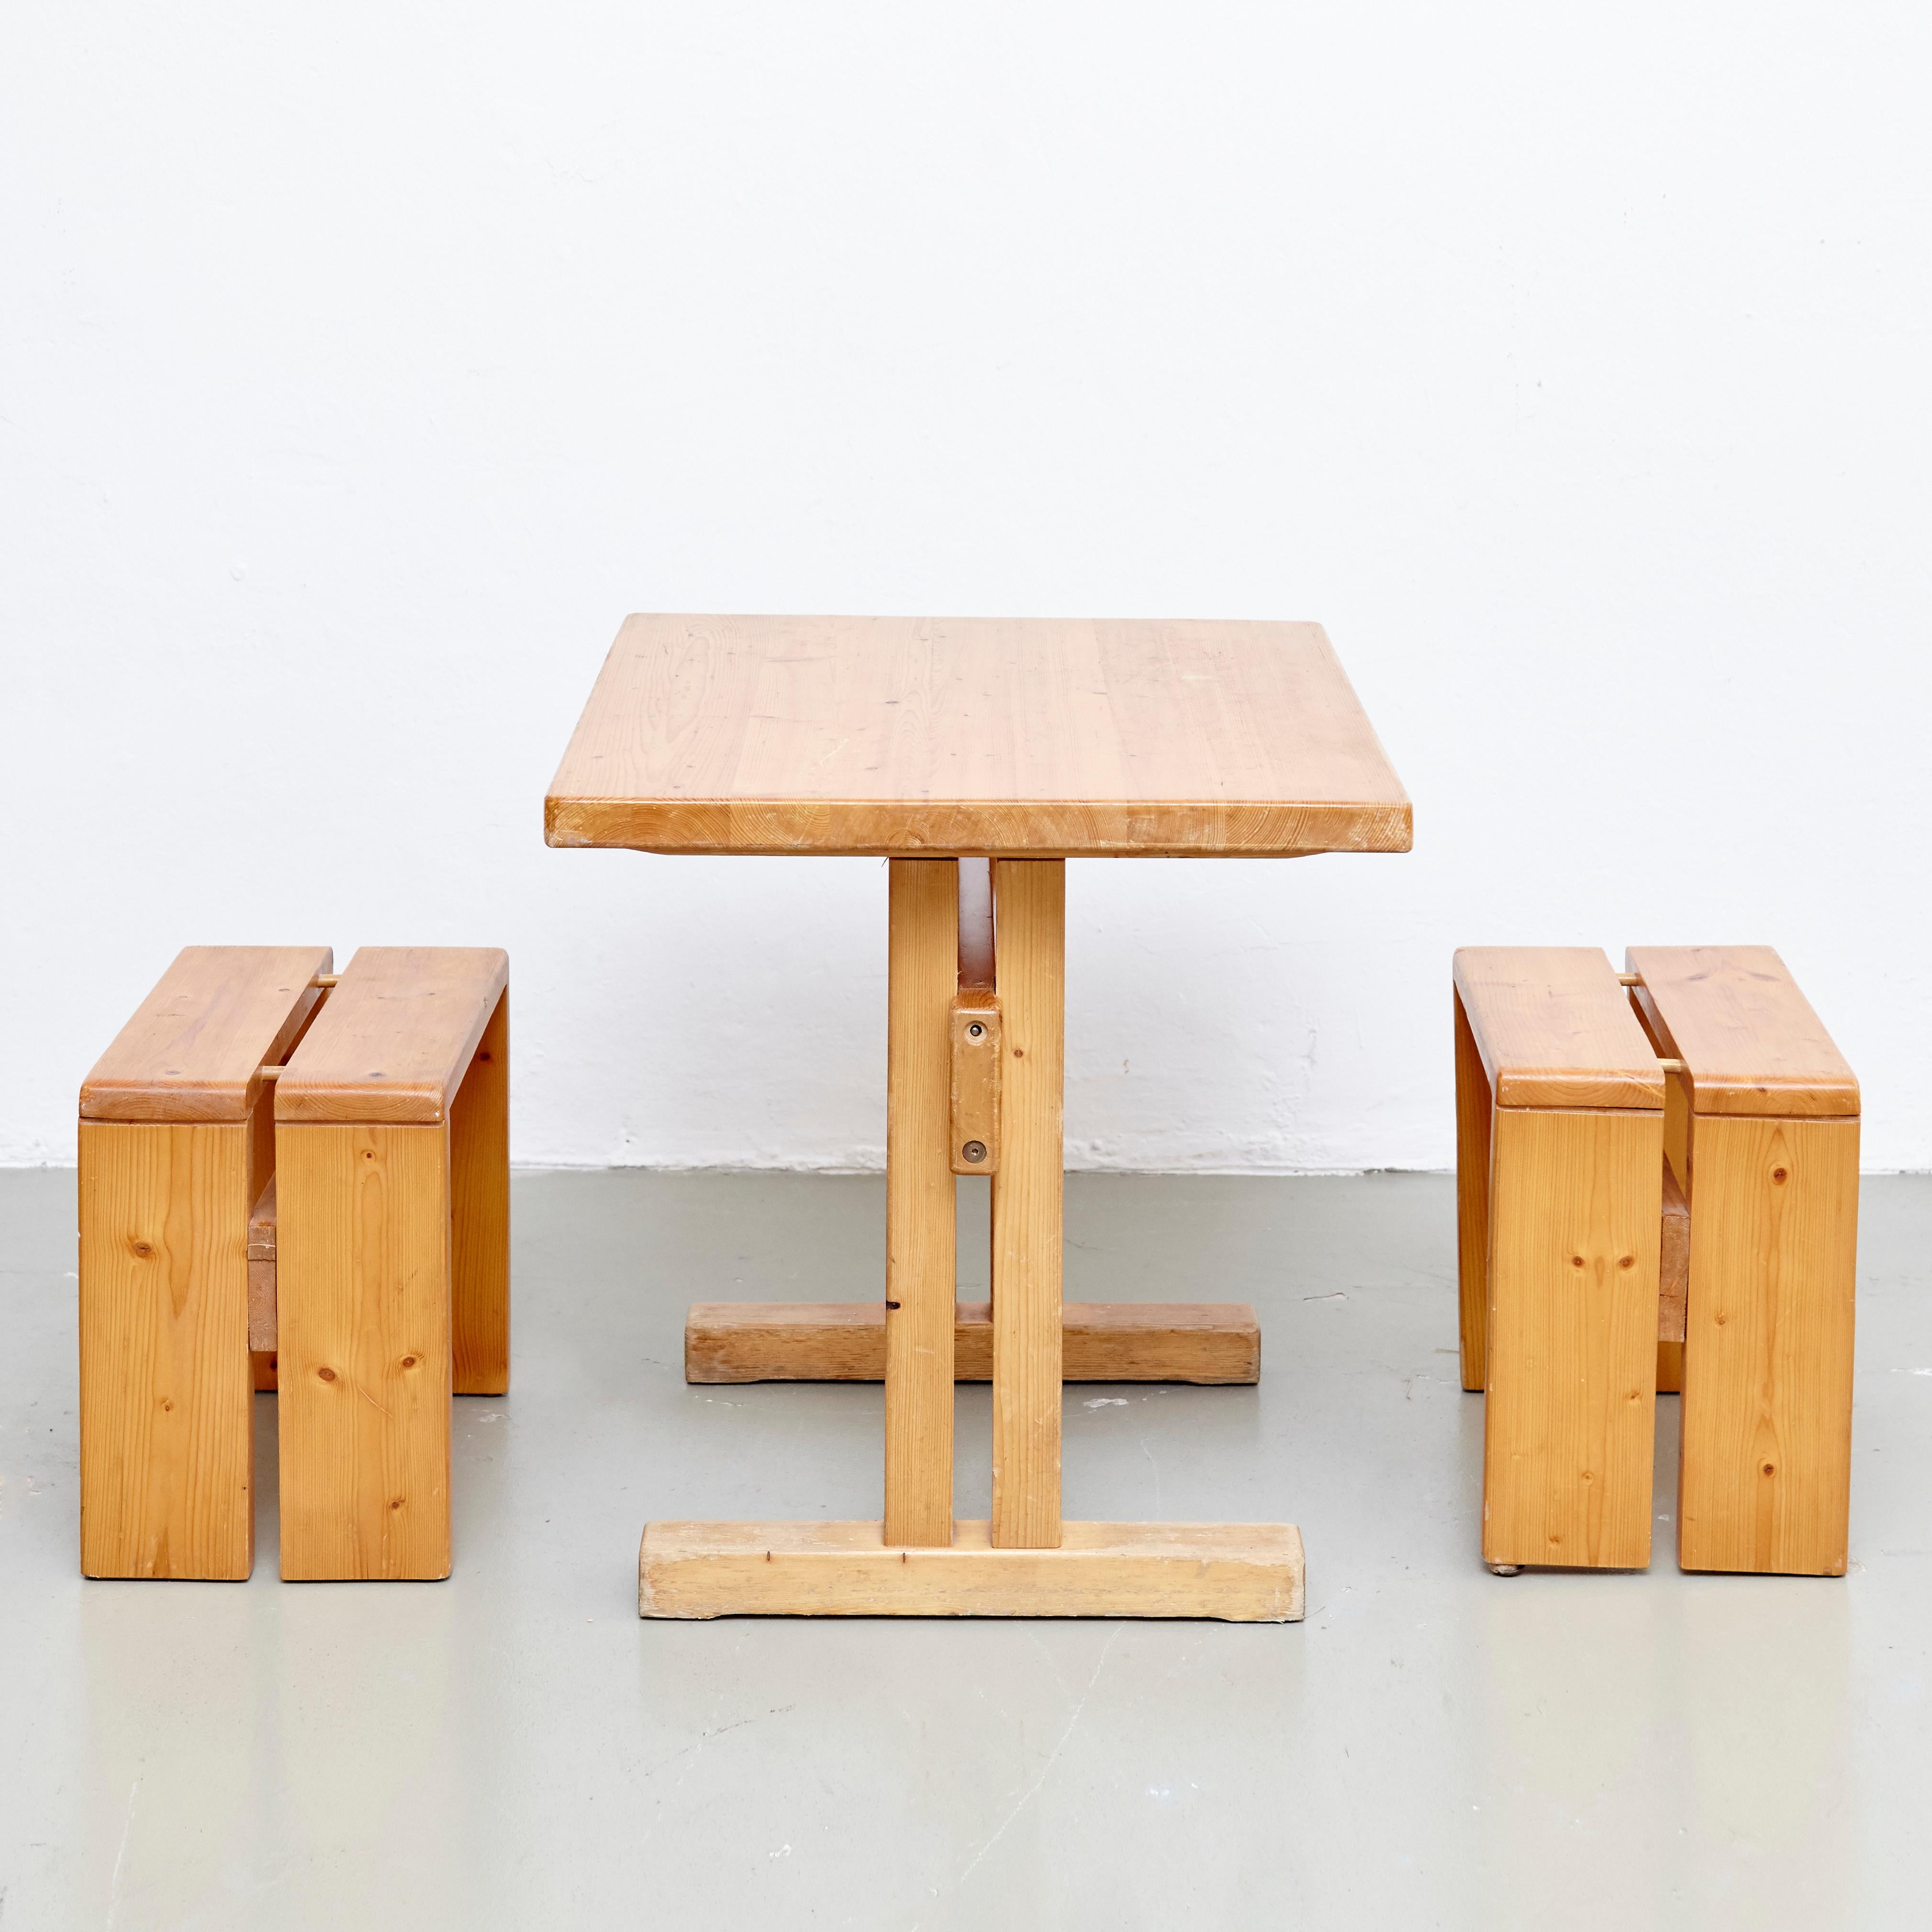 Set of table and stools designed by Charlotte Perriand for Les Arcs ski Resort circa 1960, manufactured in France.

Pinewood.

In original condition, with minor wear consistent with age and use, preserving a beautiful patina.

Measure: Table